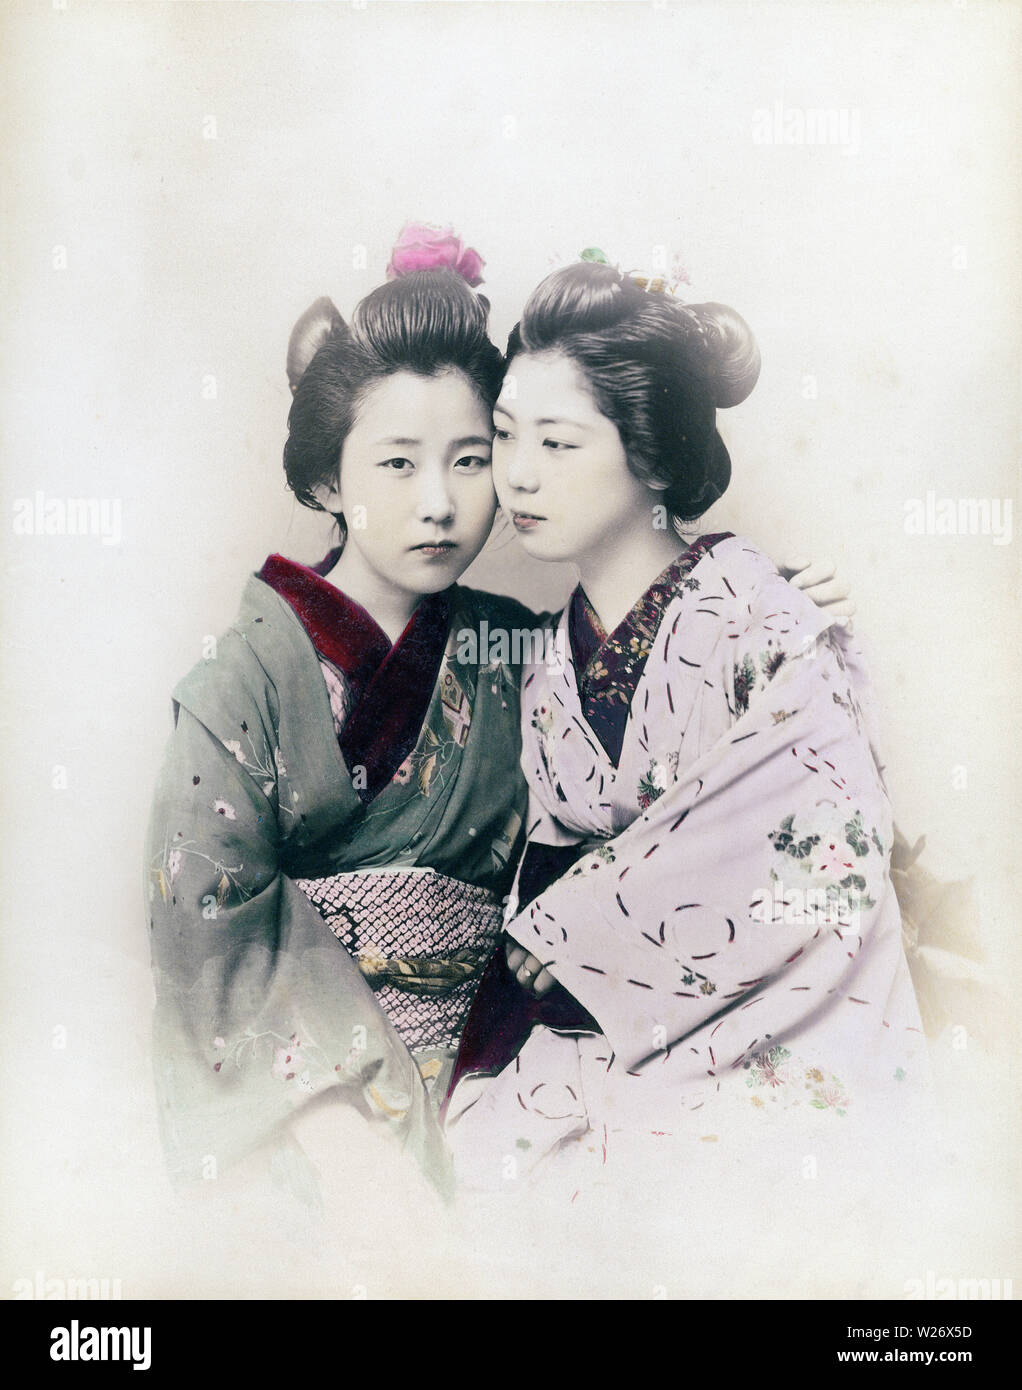 [ 1890s Japan - Two Japanese Women ] —   Two maiko (apprentice geisha) in kimono and traditional hairstyles in an intimate pose.  19th century vintage albumen photograph. Stock Photo